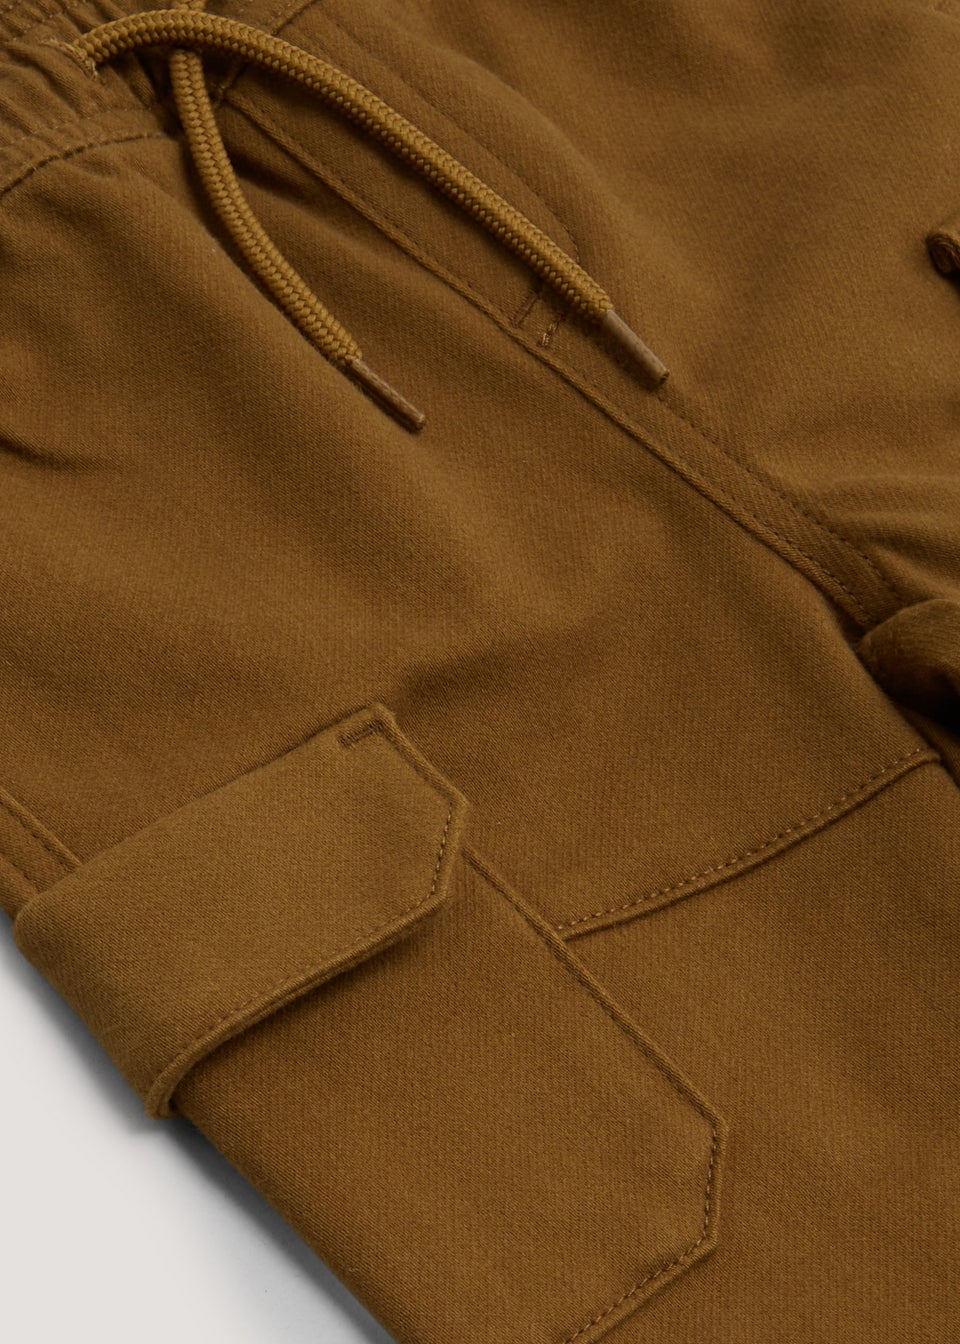 Boys Tan Knitted Cargo Trousers (9mths-6yrs)